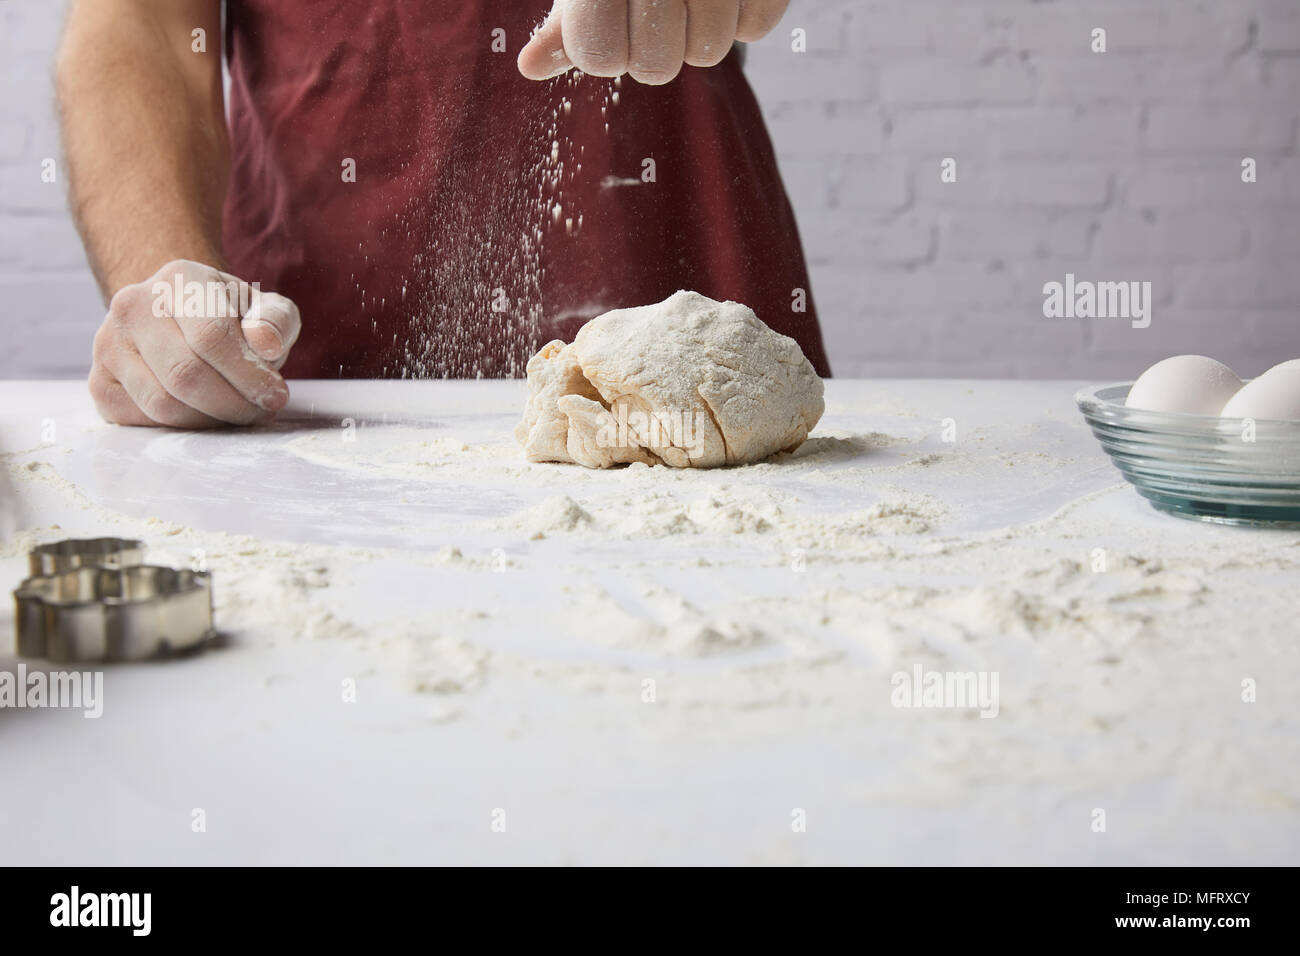 cropped image of chef preparing dough and adding flour Stock Photo